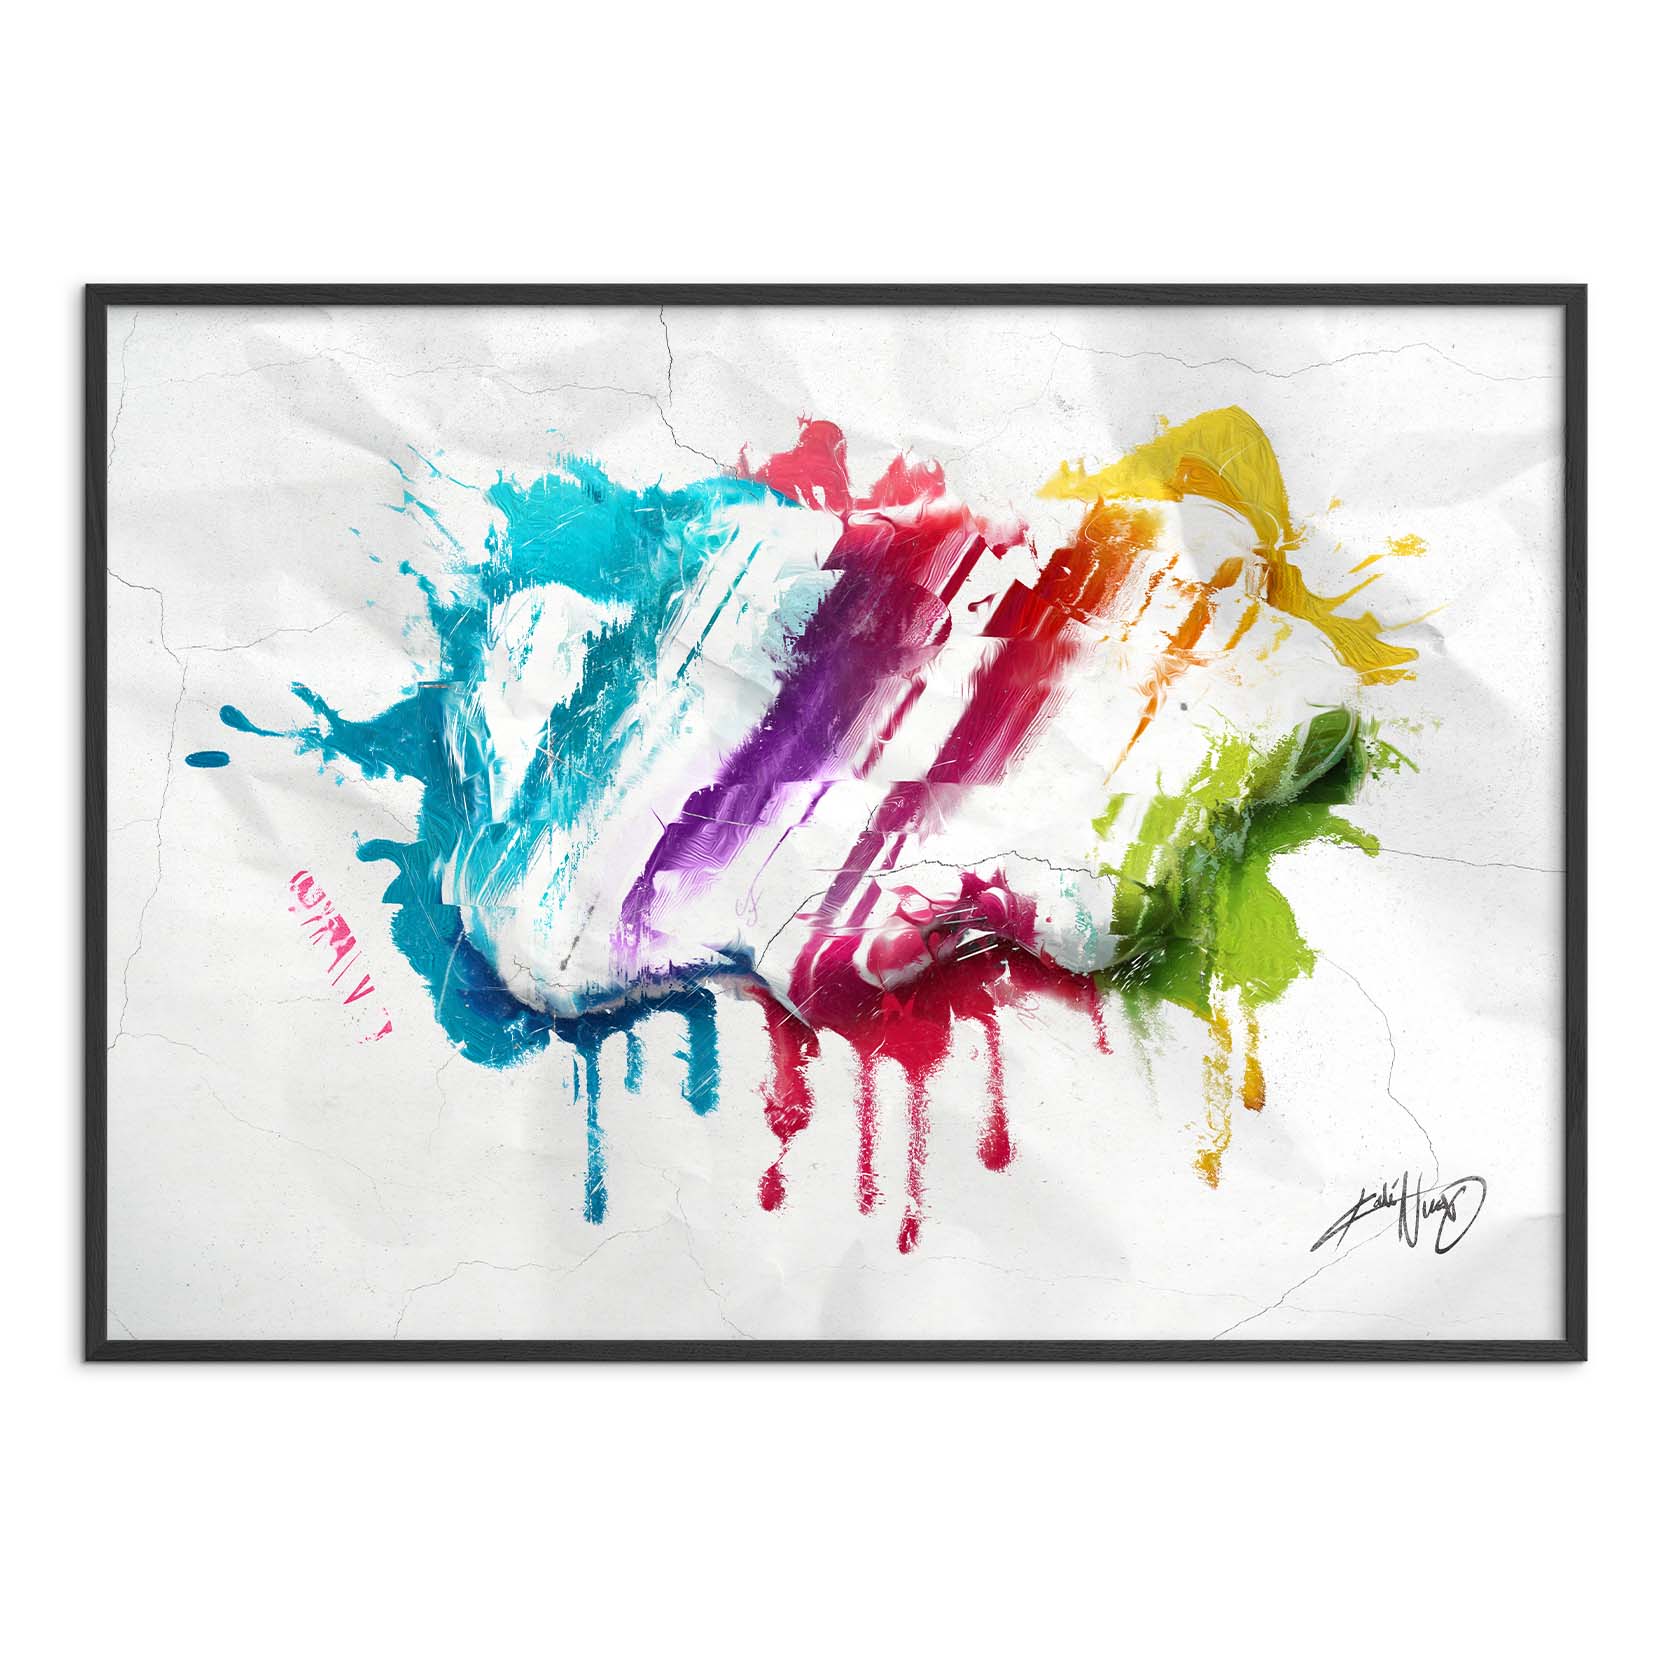 colorful calligraphy abstract art poster in a black wood frame on a white background